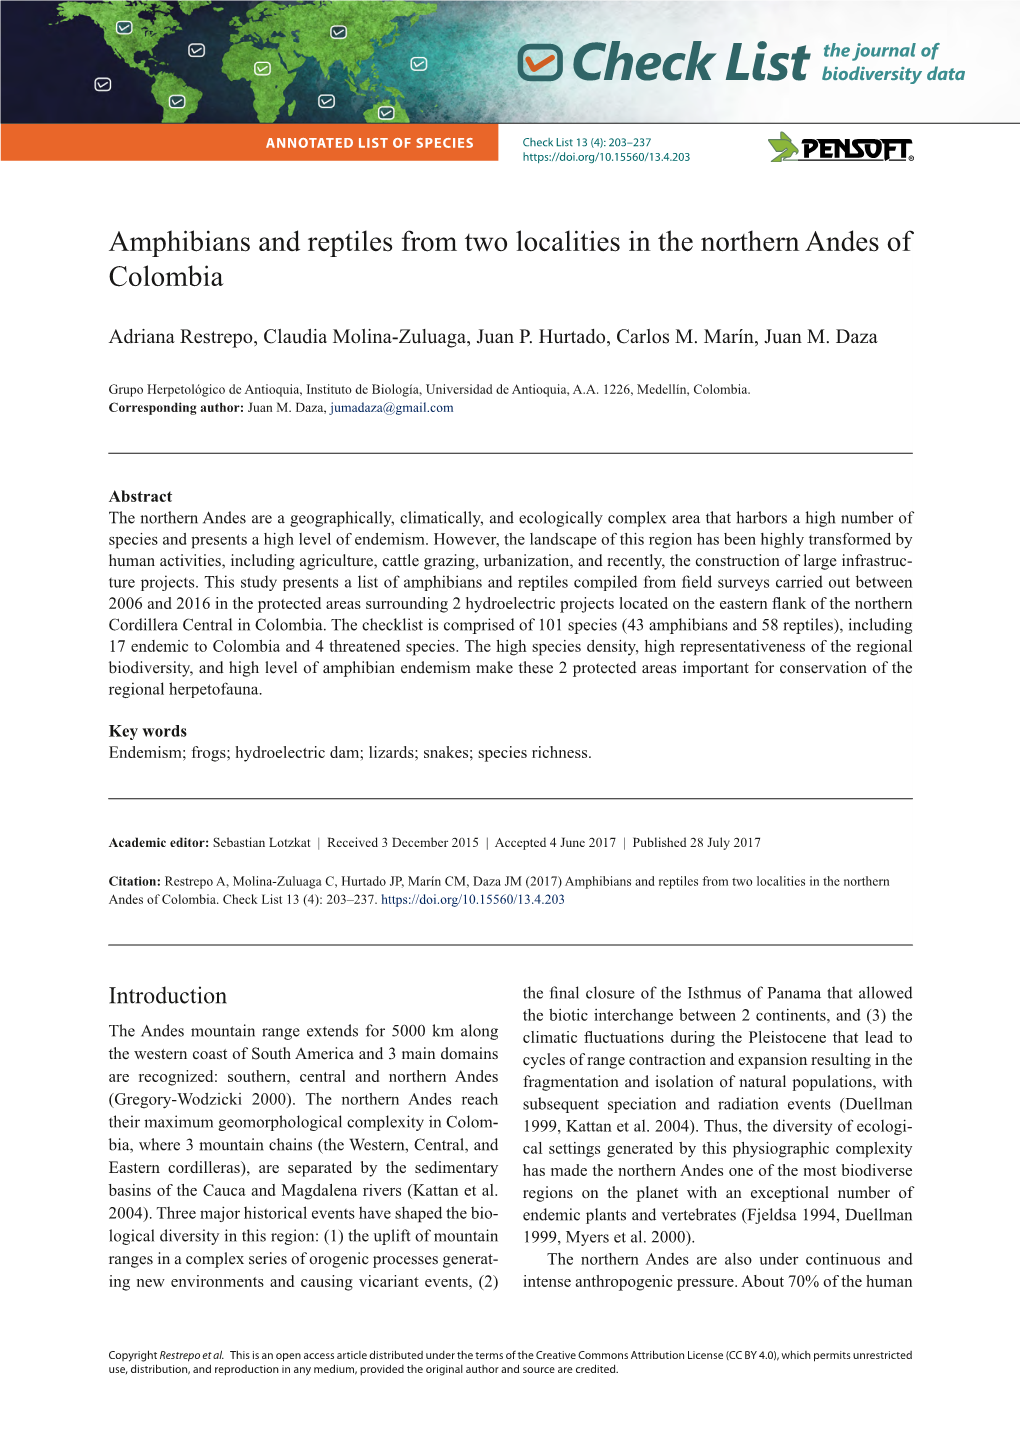 Amphibians and Reptiles from Two Localities in the Northern Andes of Colombia